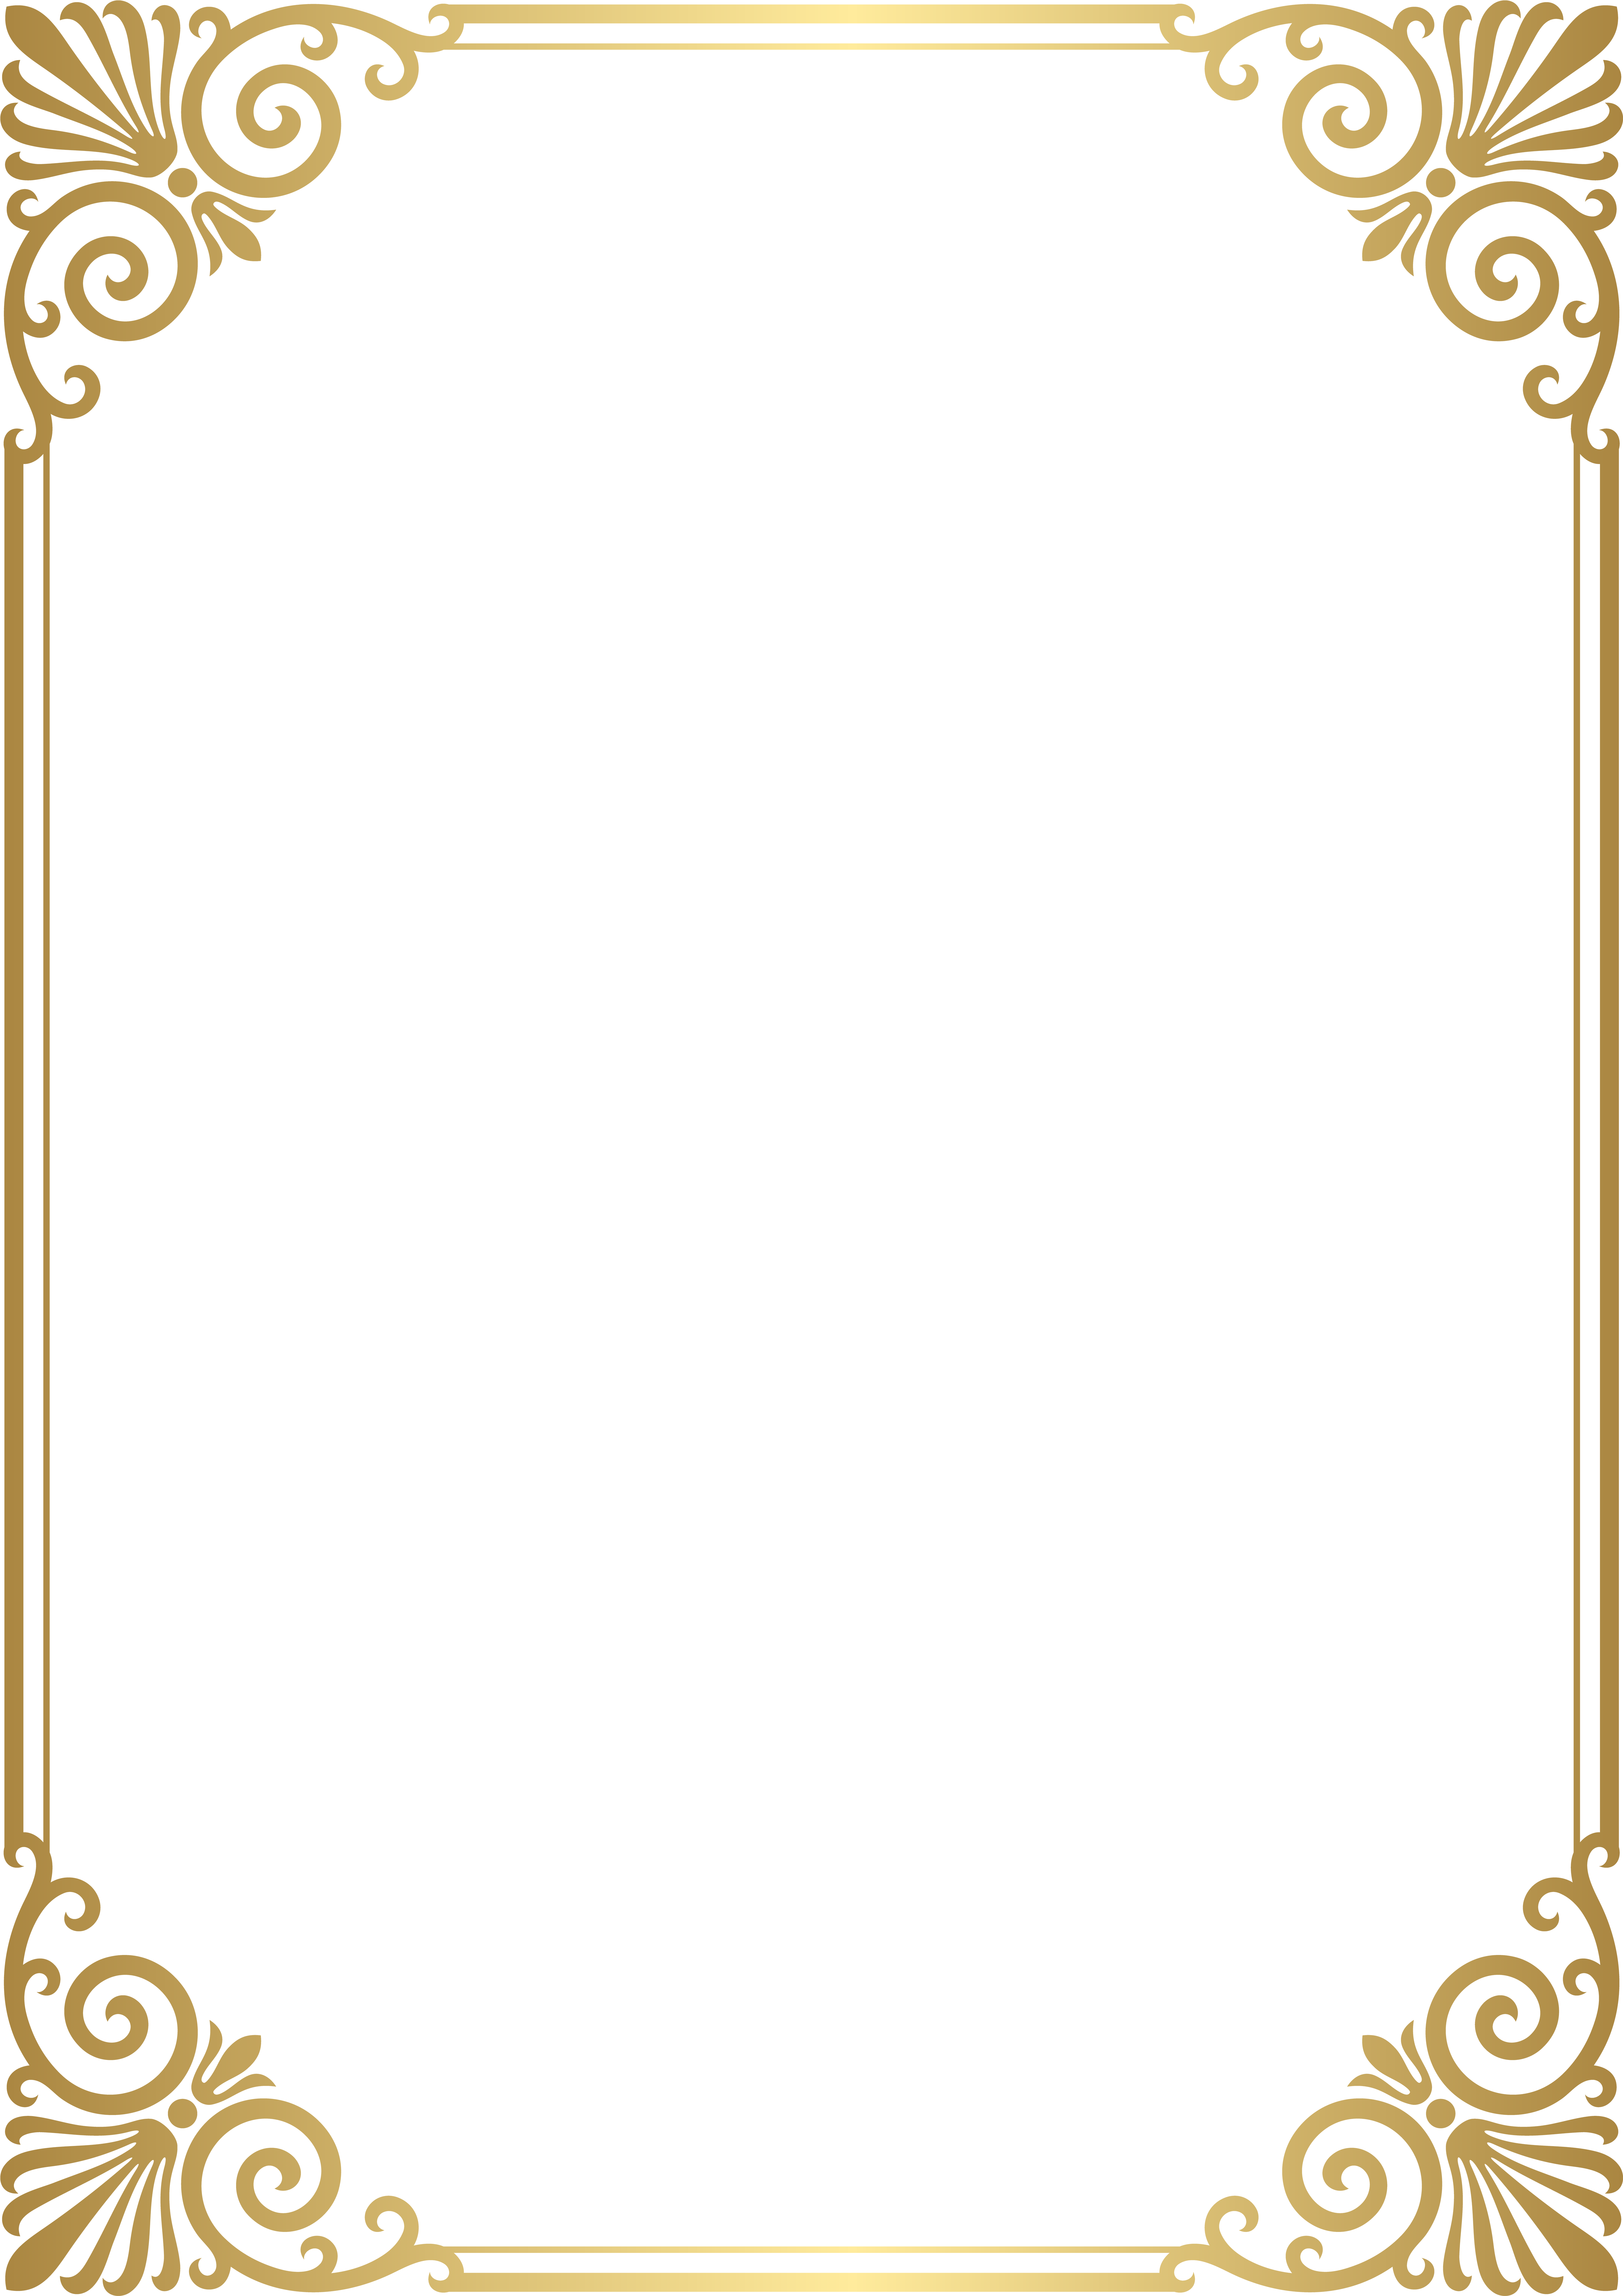 Download A Black Background With Gold Border [100% Free] - FastPNG